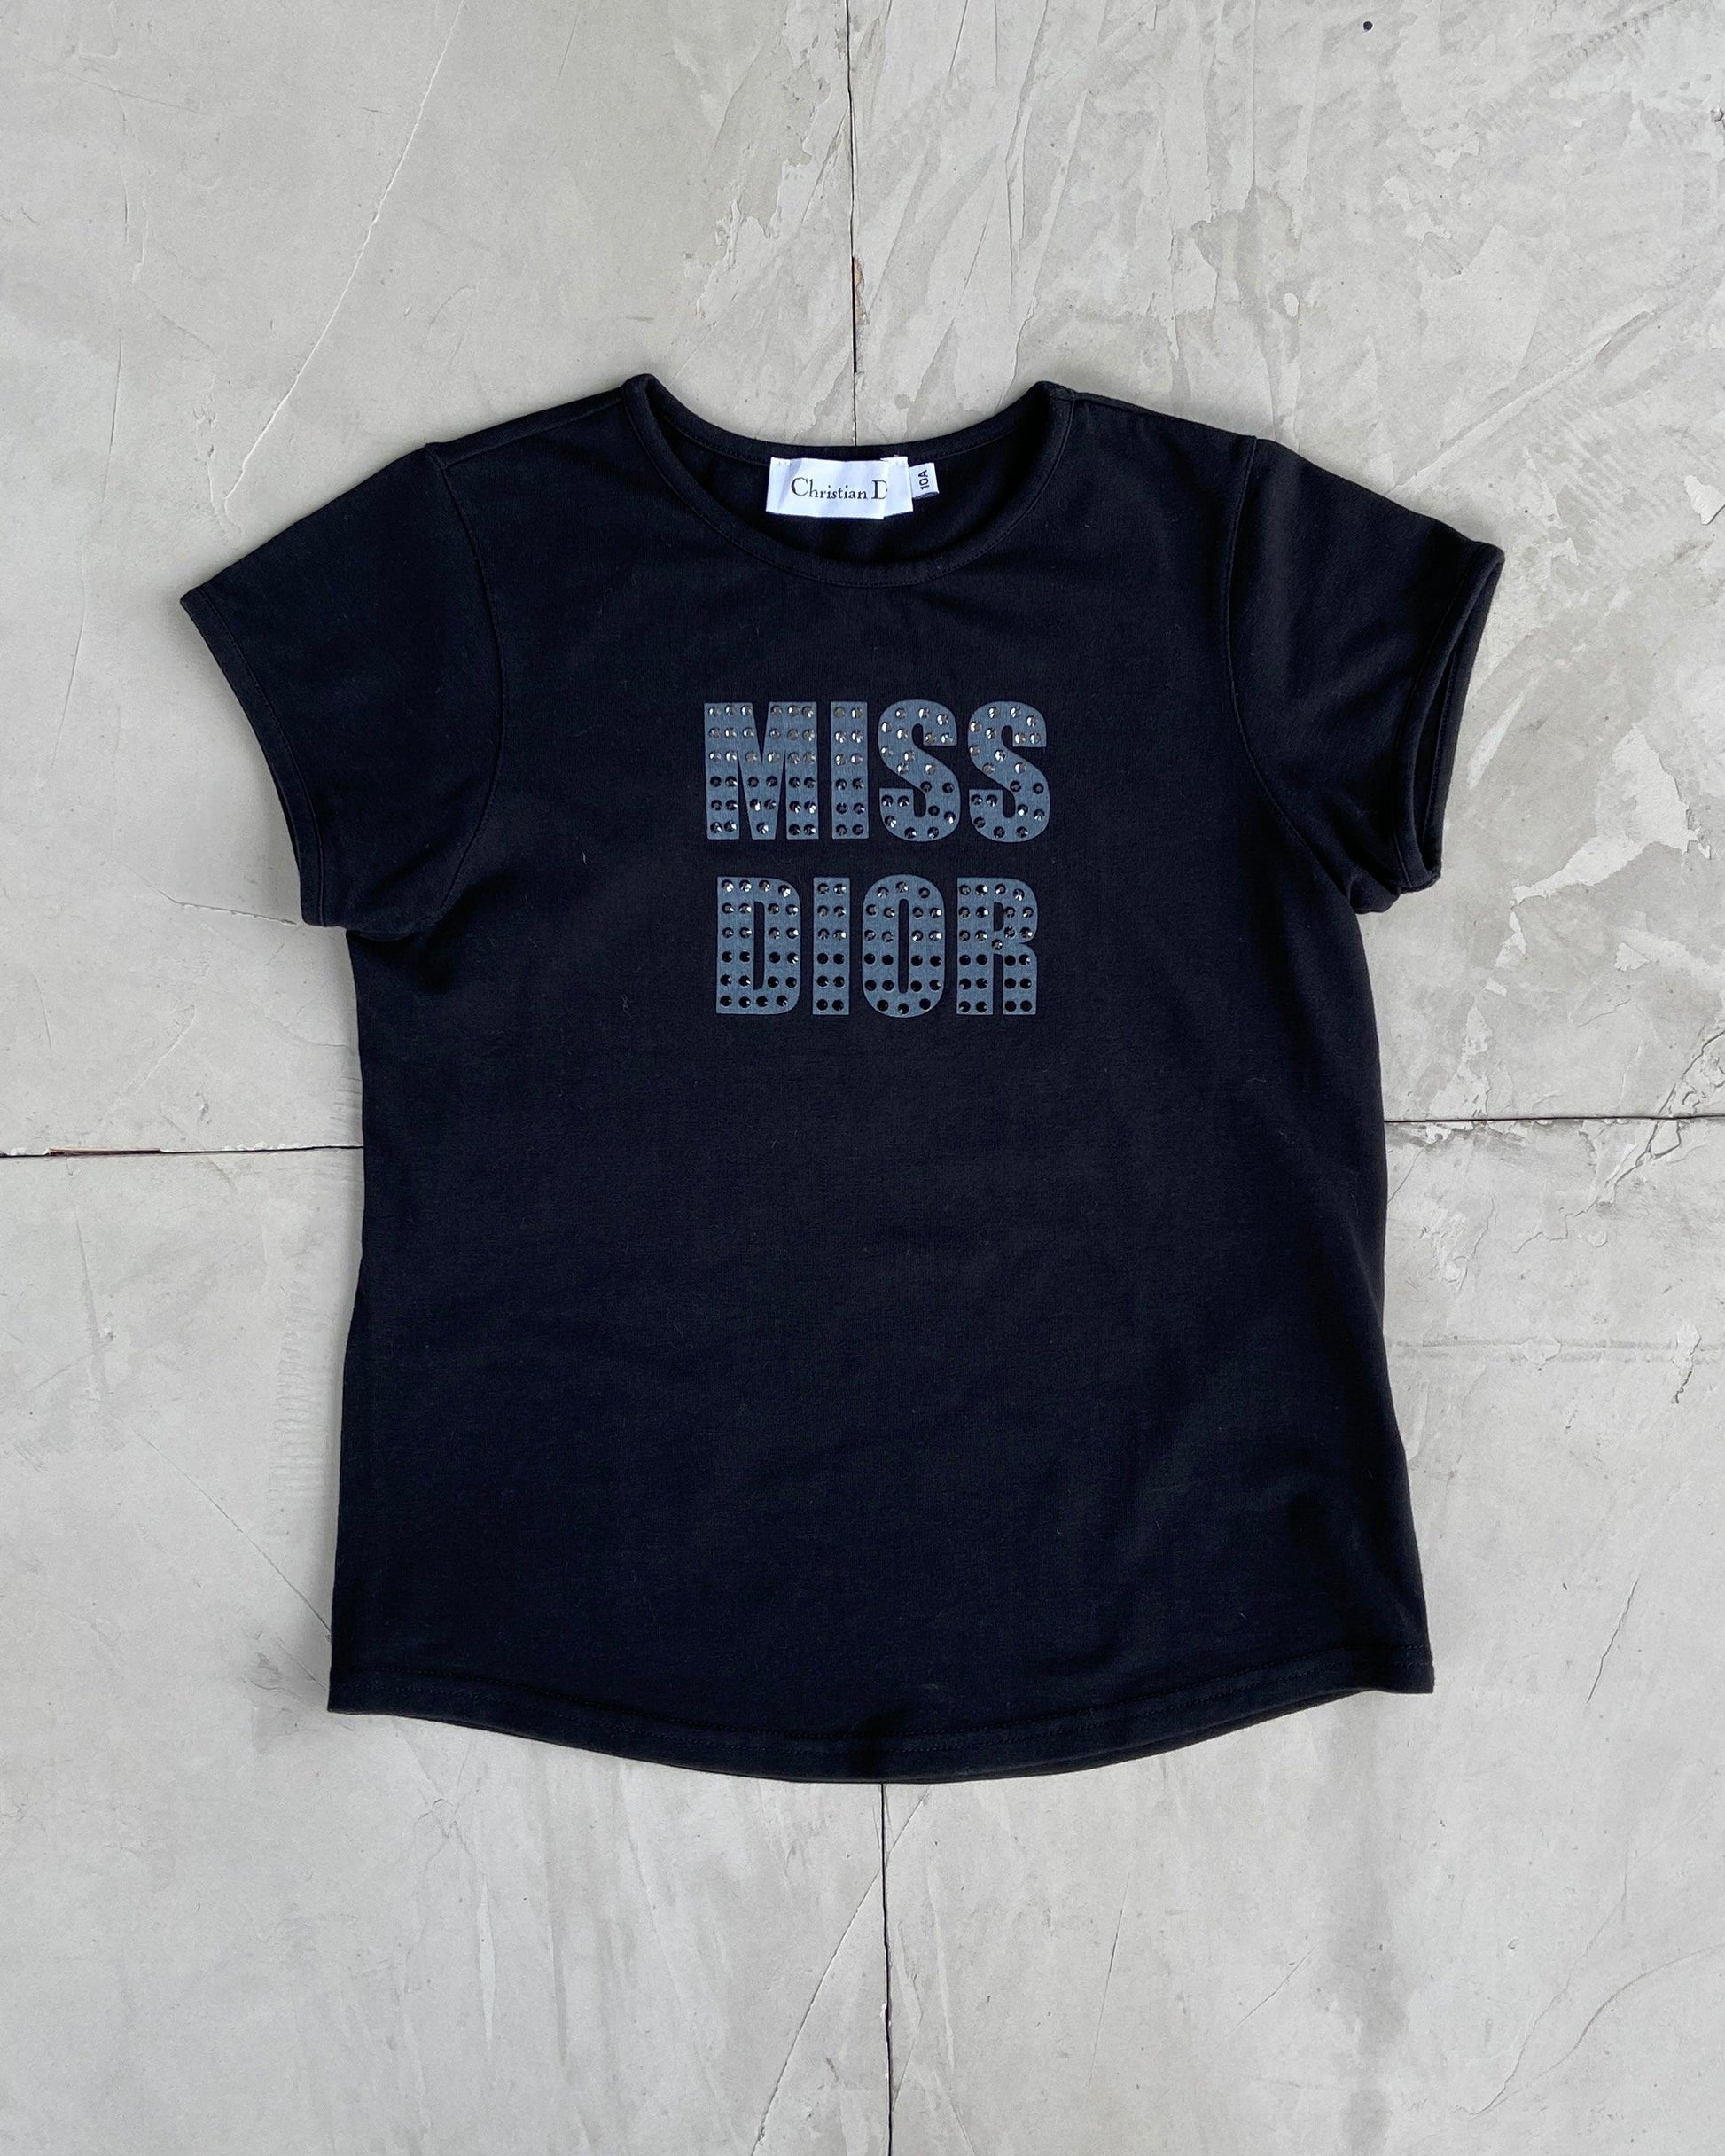 CHRISTIAN DIOR "MISS DIOR" RHINESTONED TOP - XS/S - Known Source